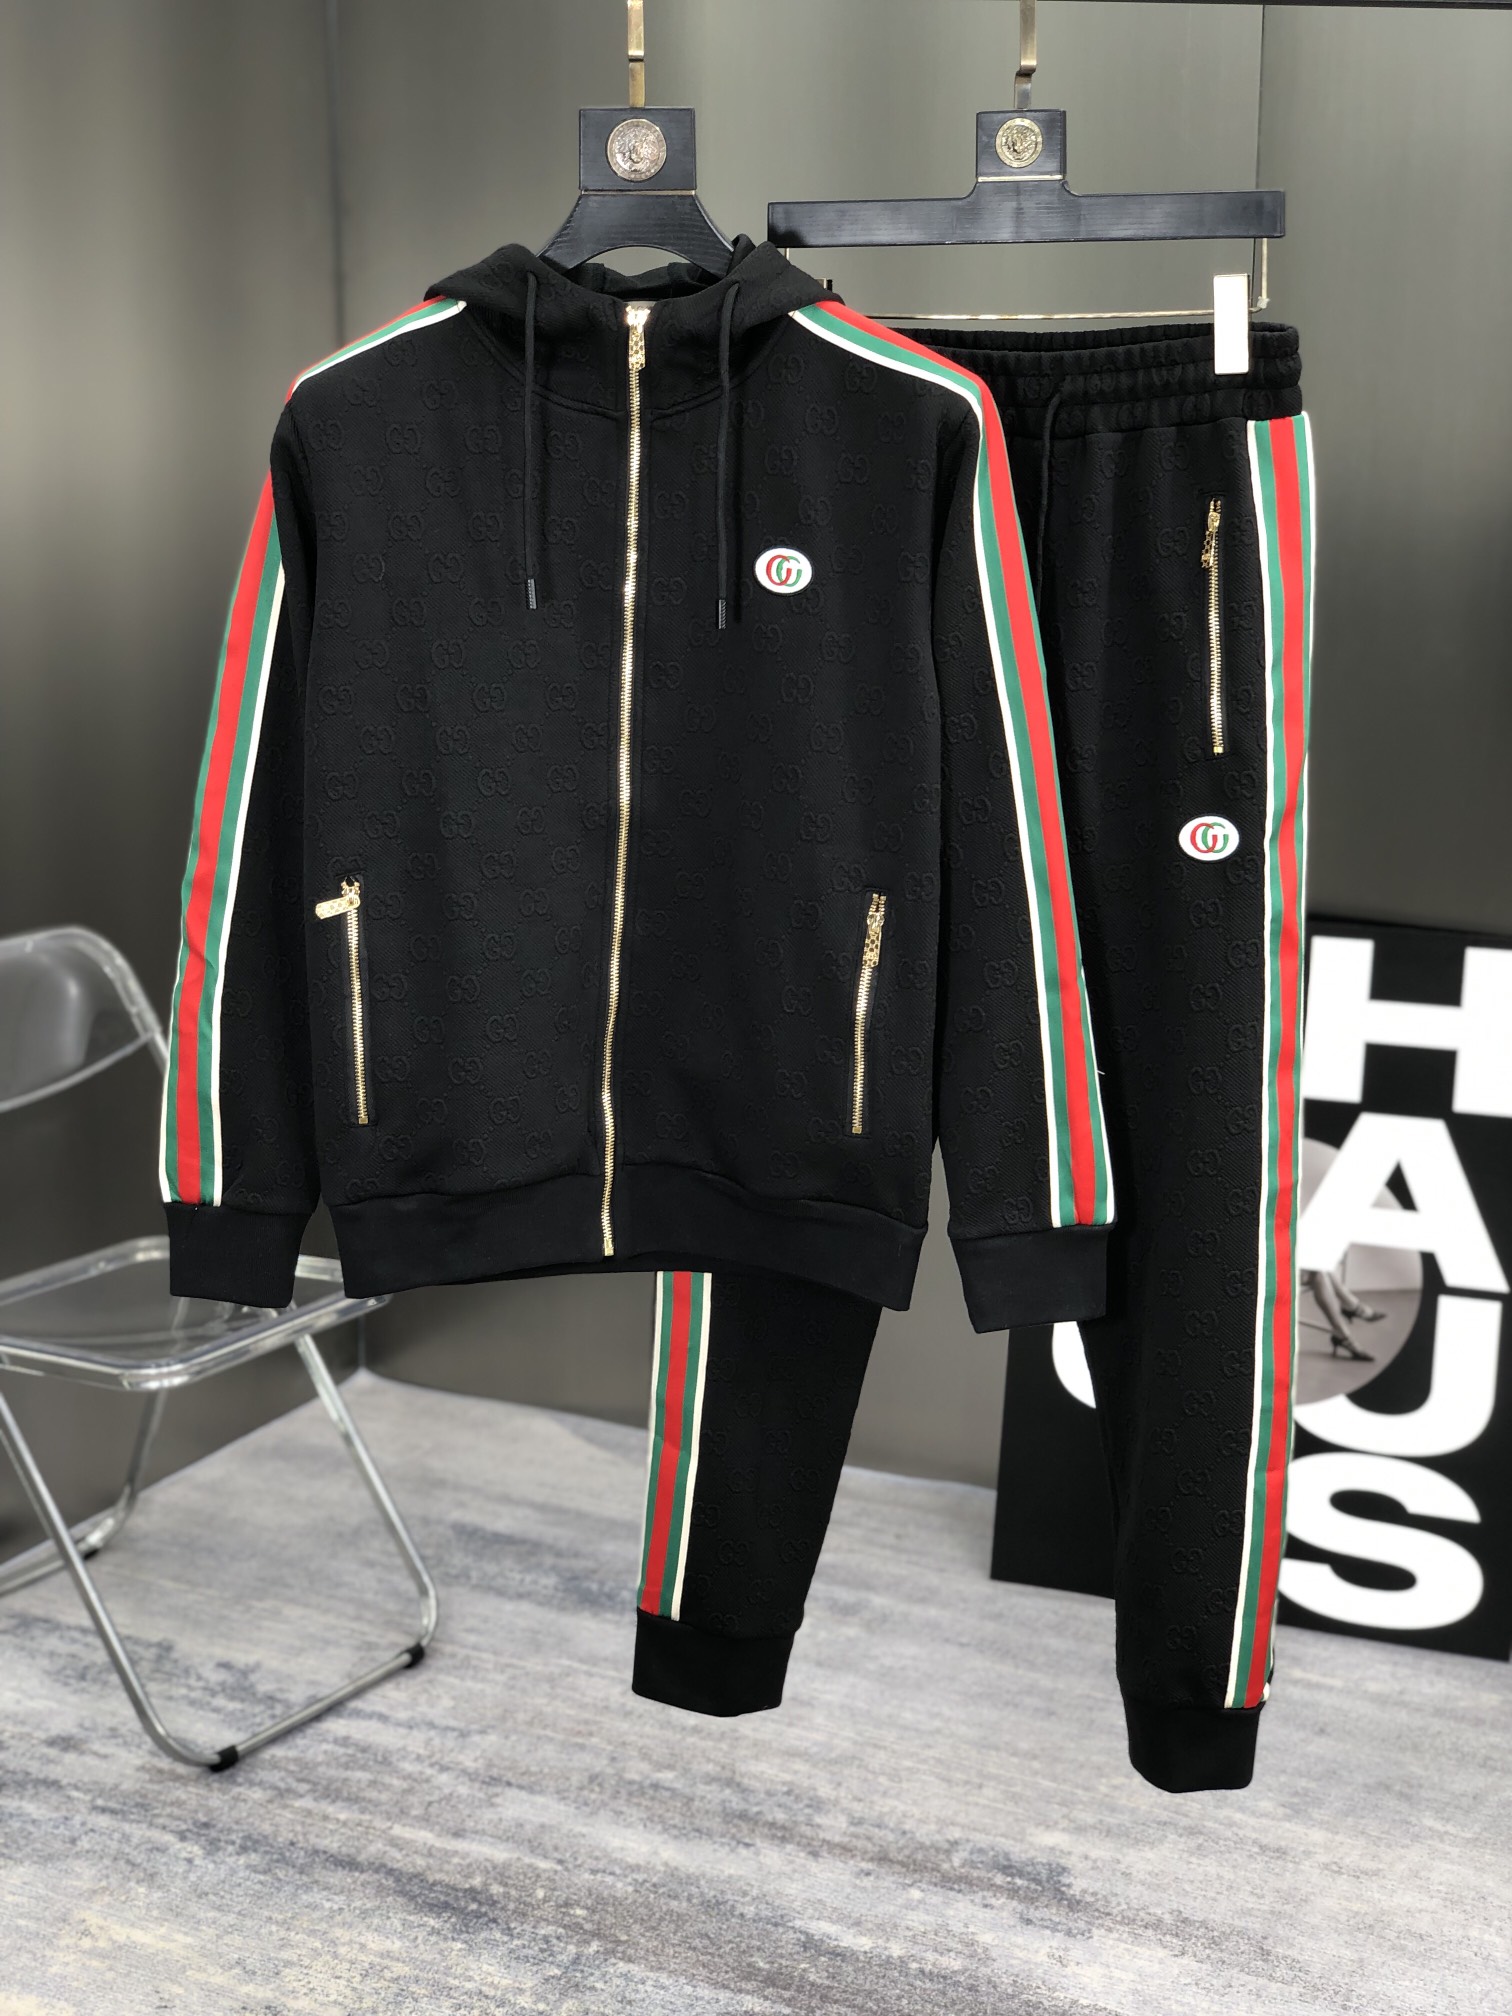 Gucci Clothing Two Piece Outfits & Matching Sets Fall/Winter Collection Fashion Hooded Top